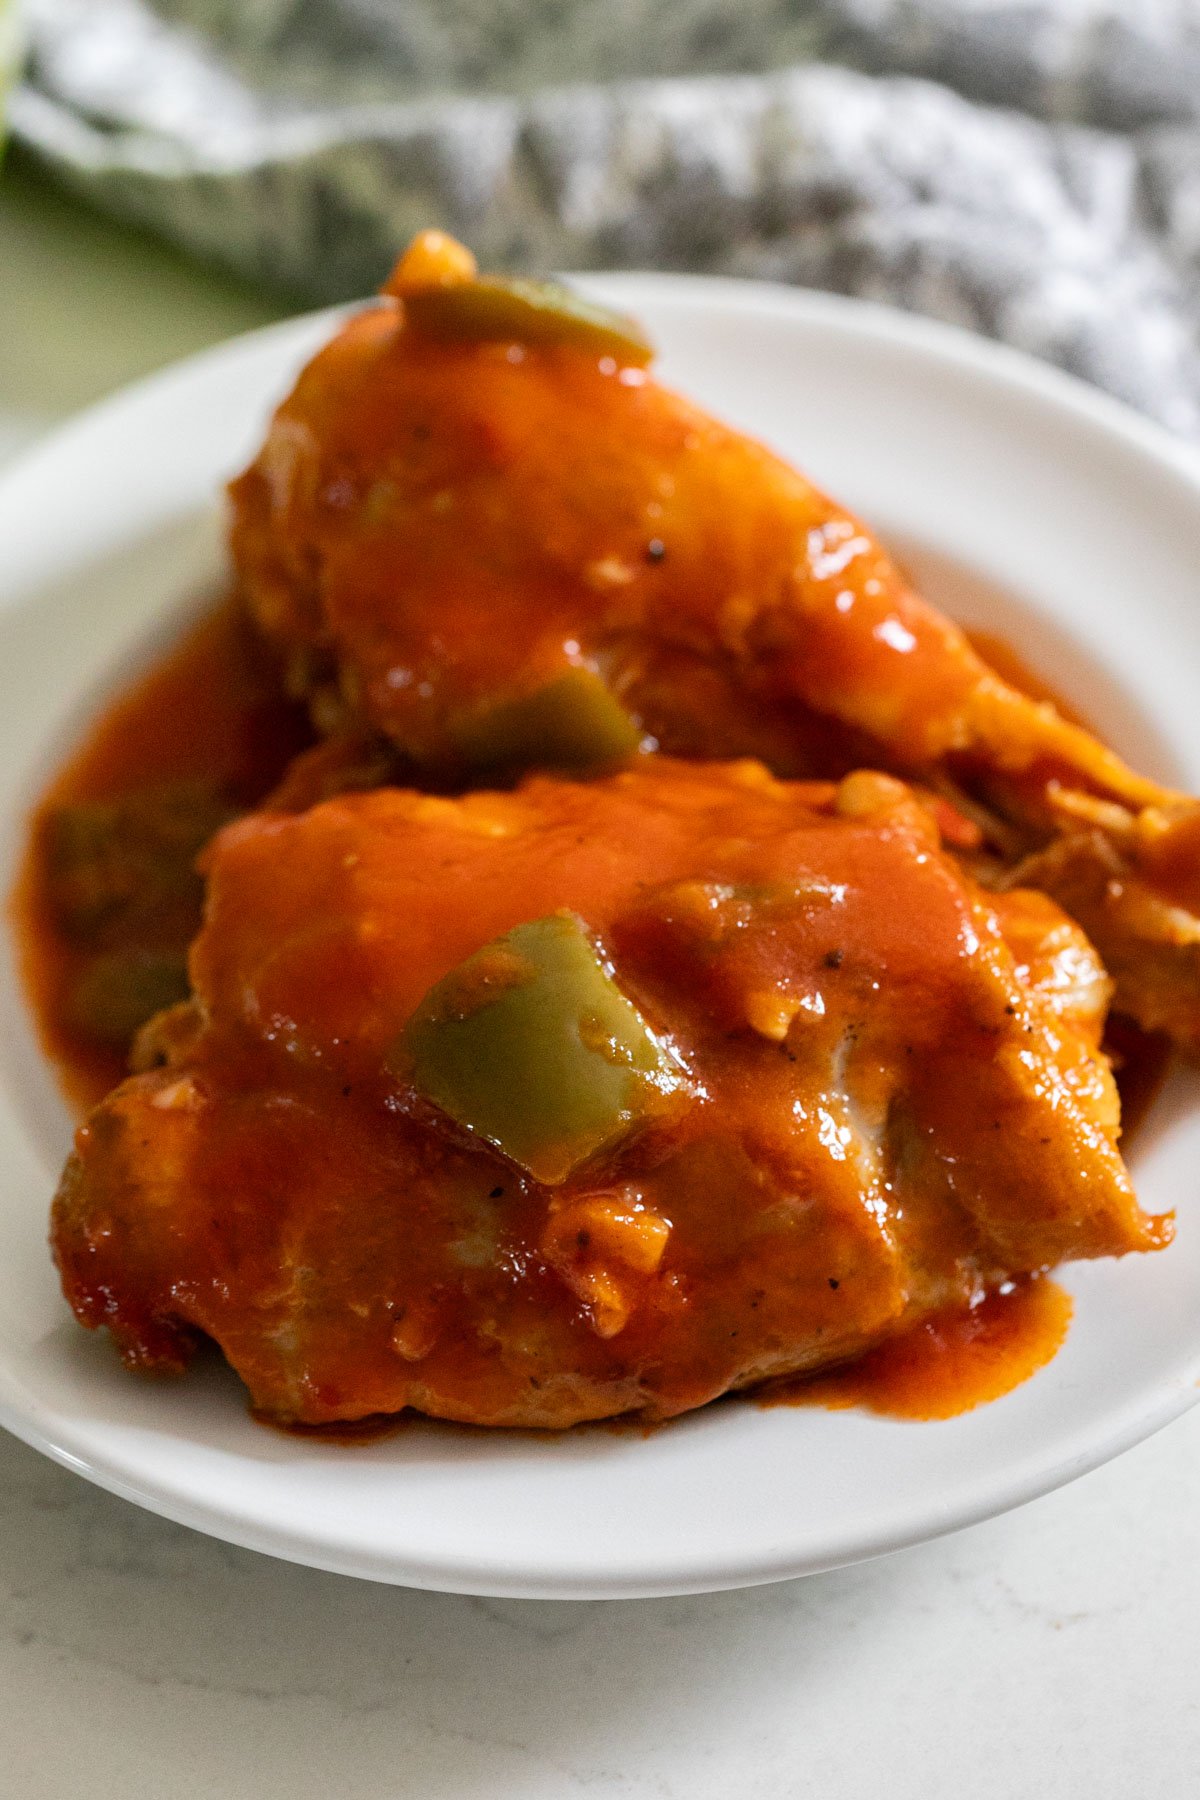 A close up image of chicken with tomato sauce and green peppers on a plate.